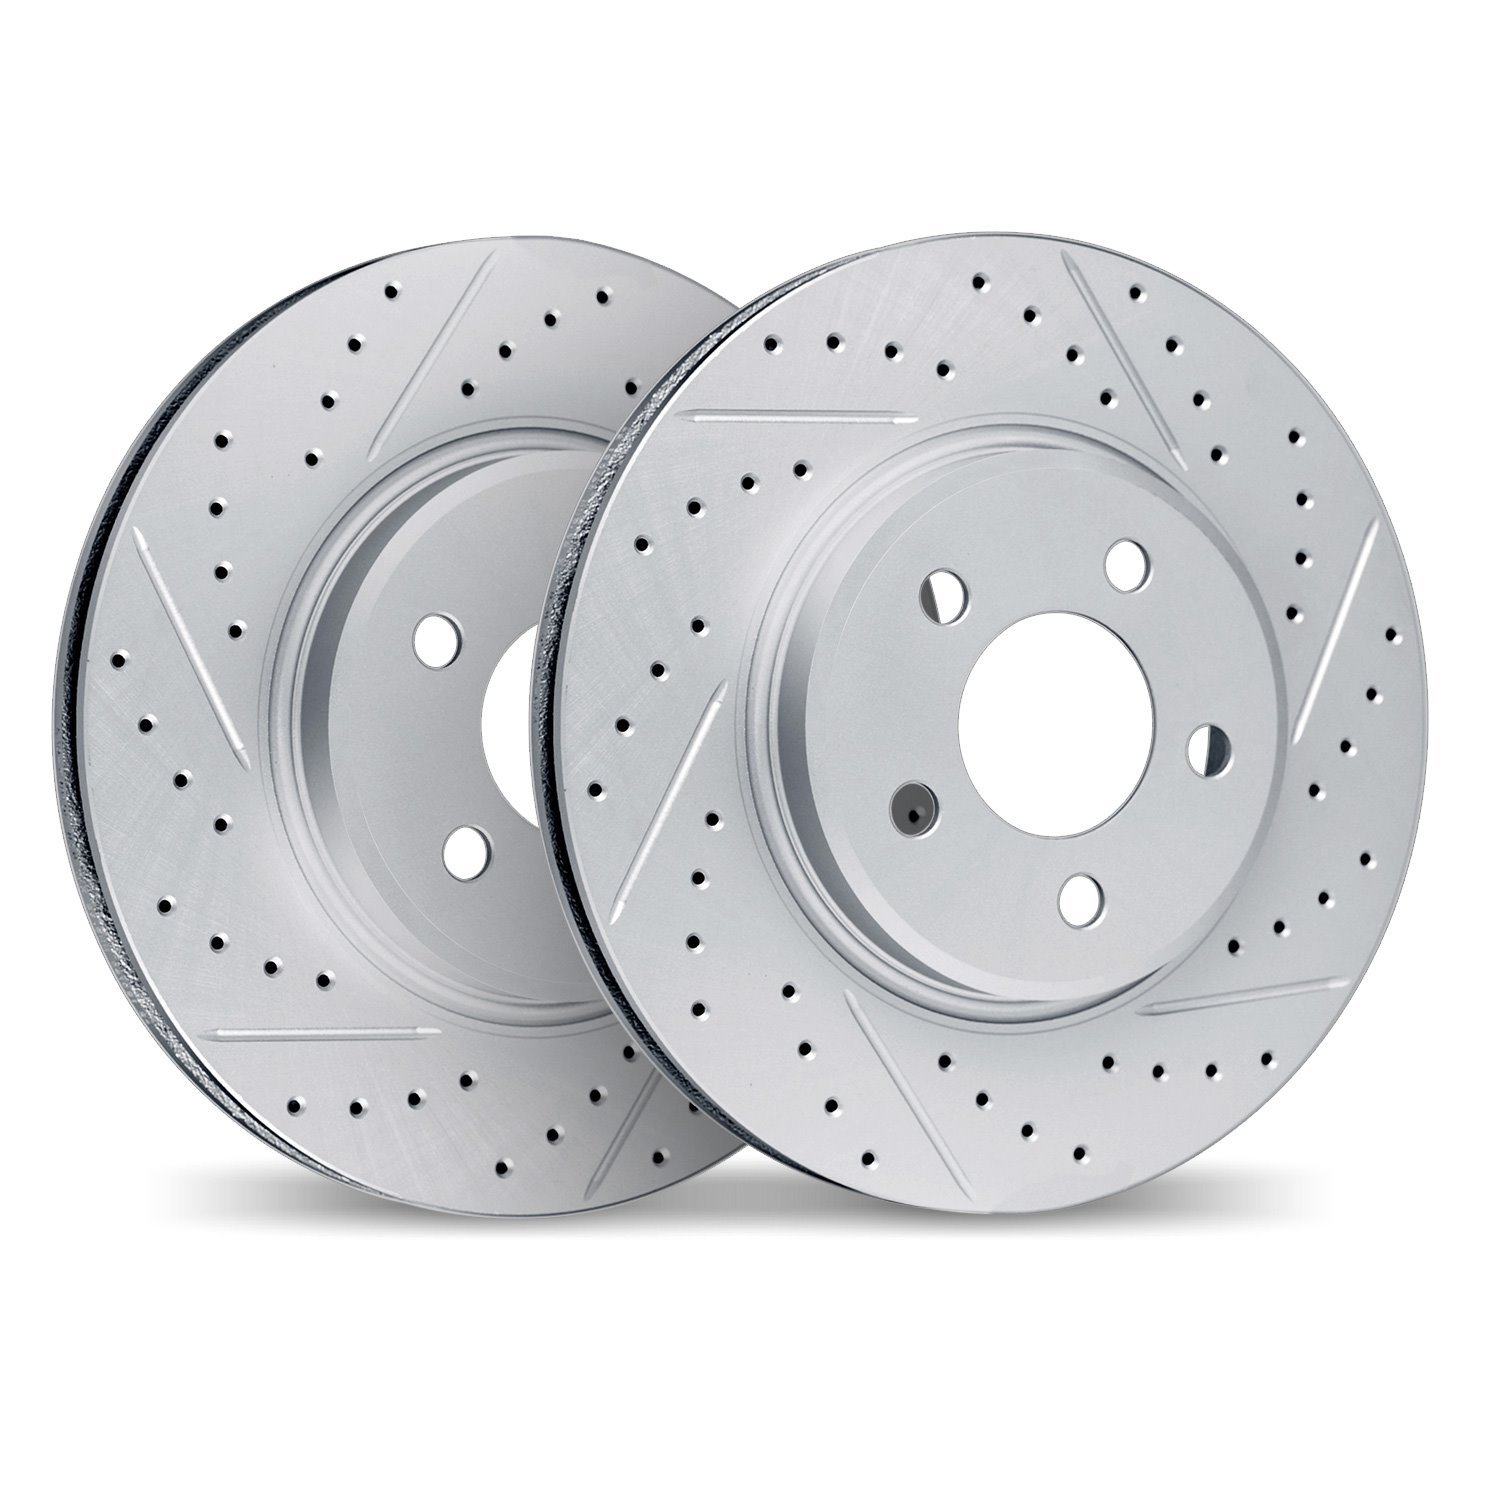 2002-47145 Geoperformance Drilled/Slotted Brake Rotors, Fits Select GM, Position: Rear